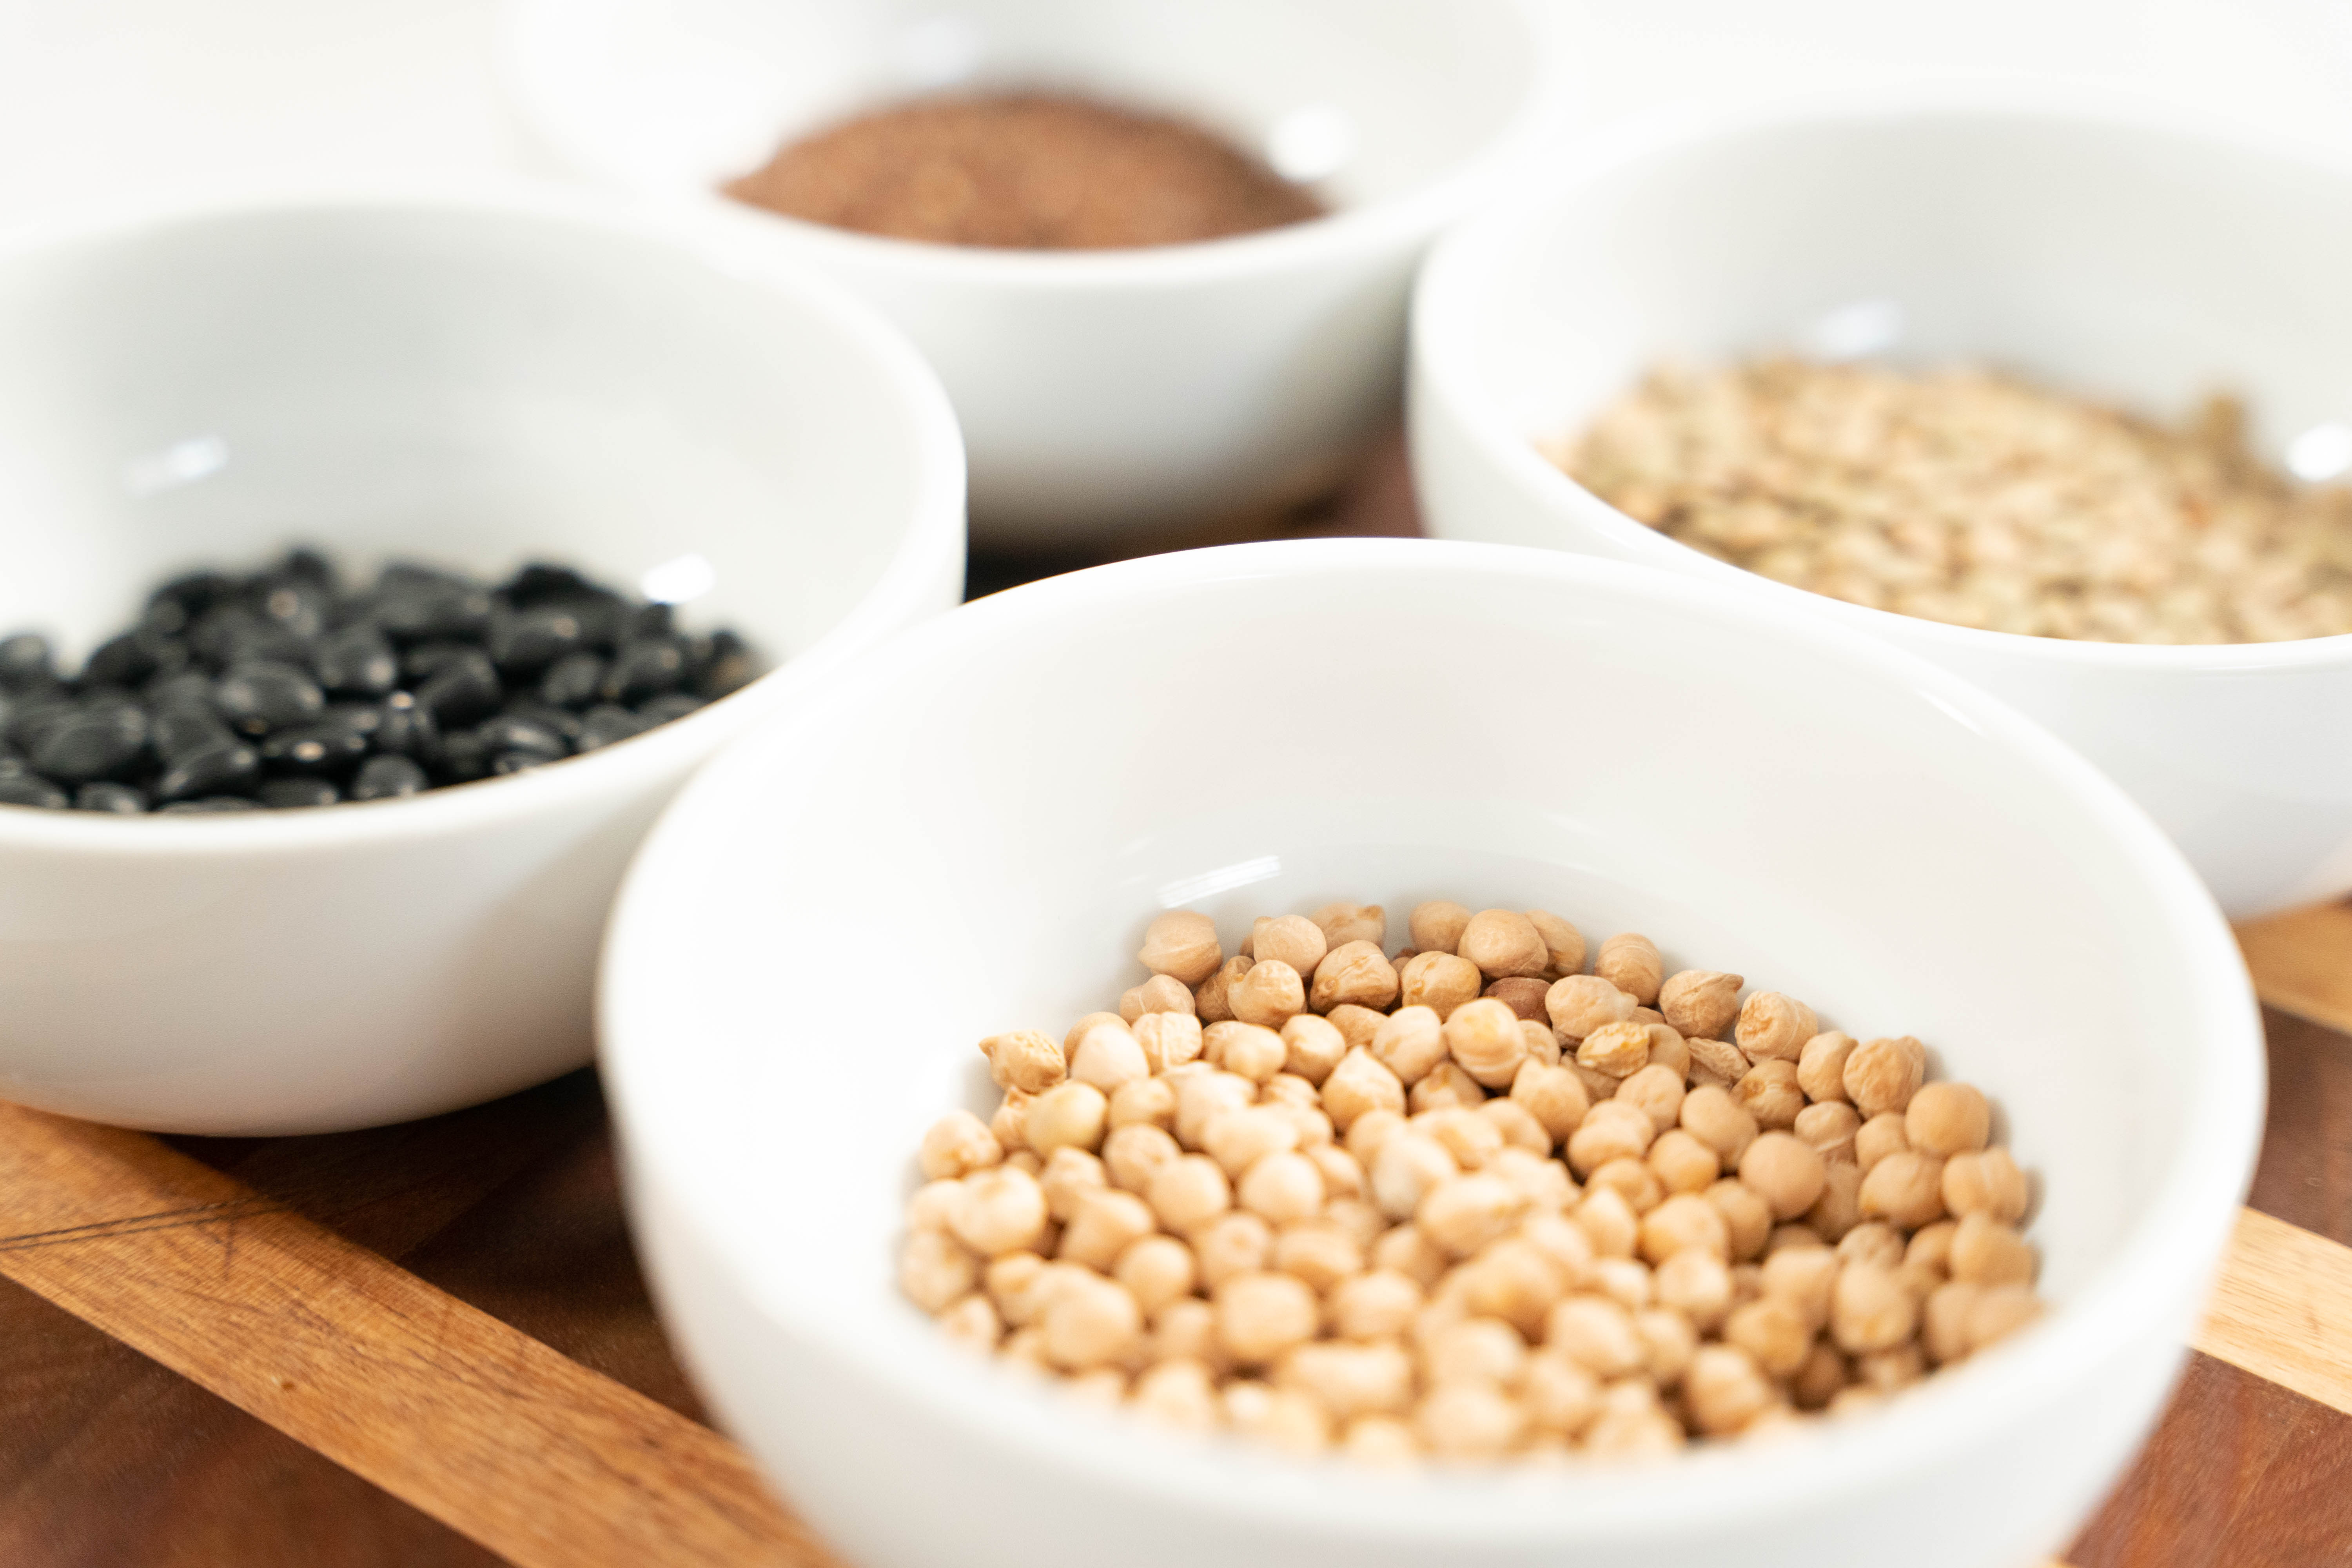 Legumes, in addition to providing longer satiety due to their high fiber content, are high in protein and help regulate cholesterol (Photo: Franco Fafasuli)